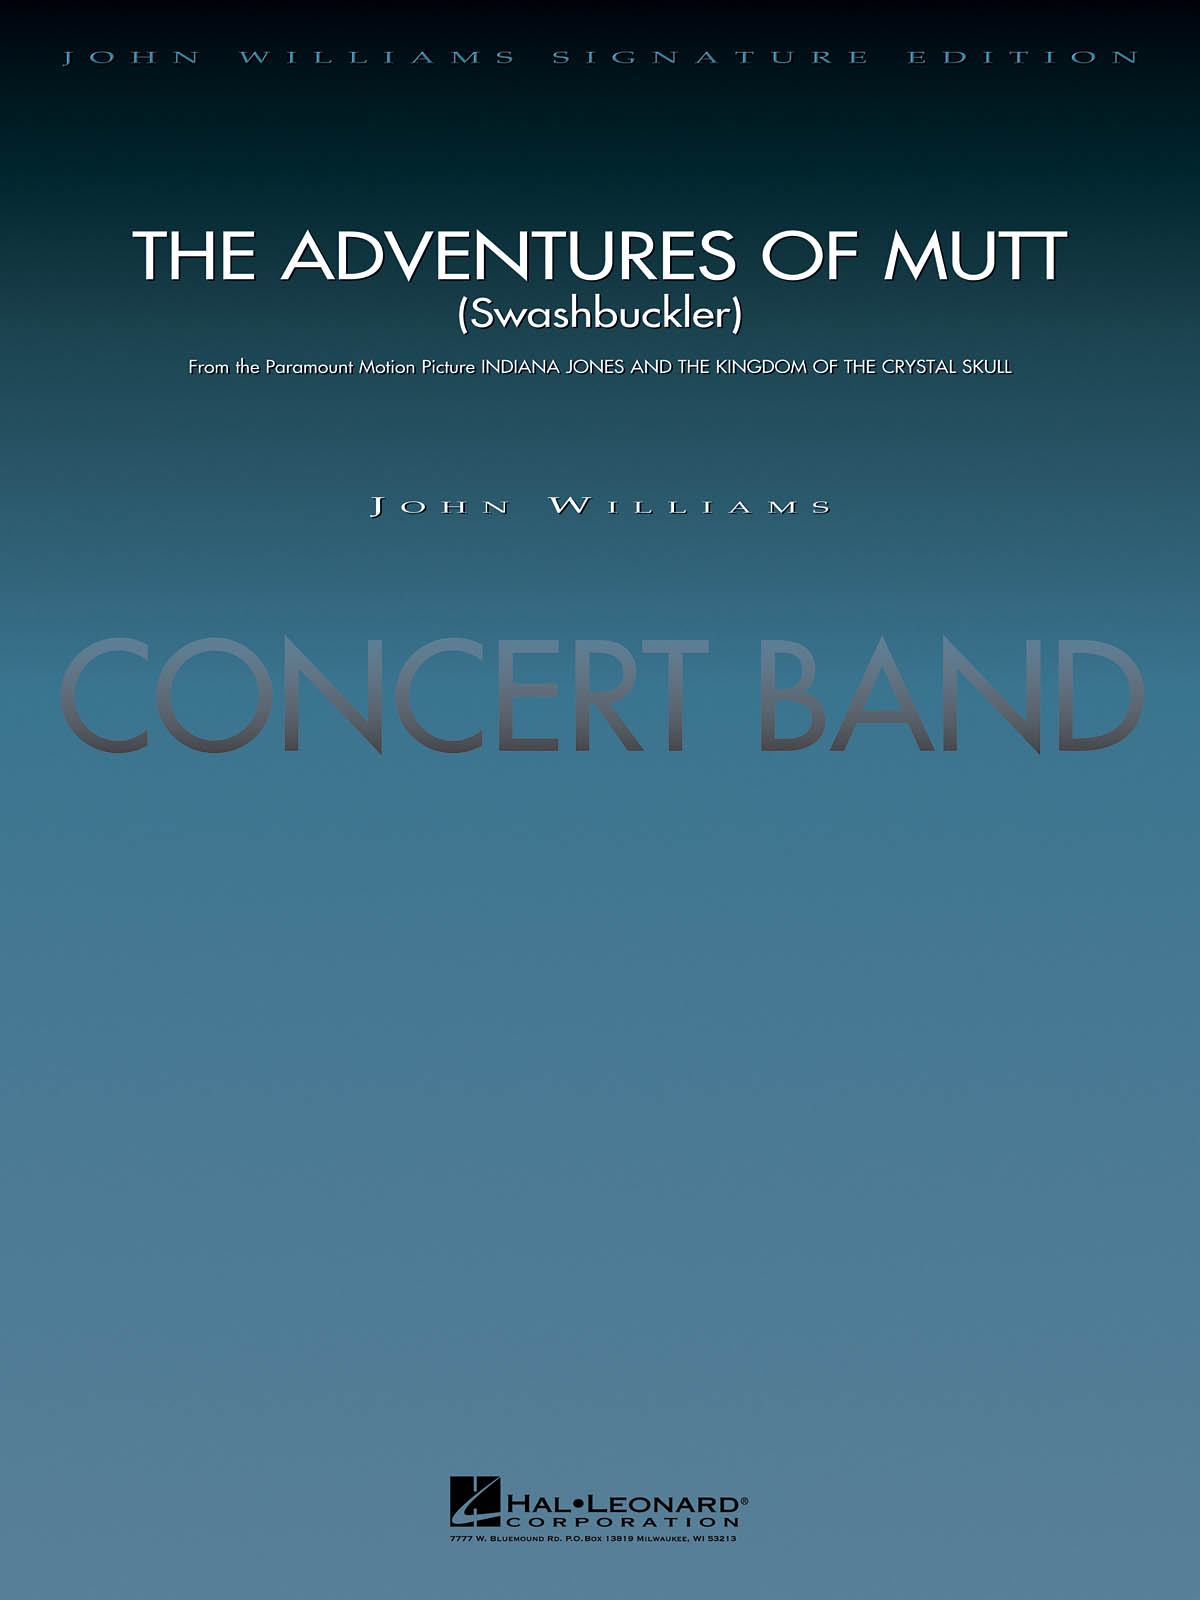 Williams: The Adventures of Mutt